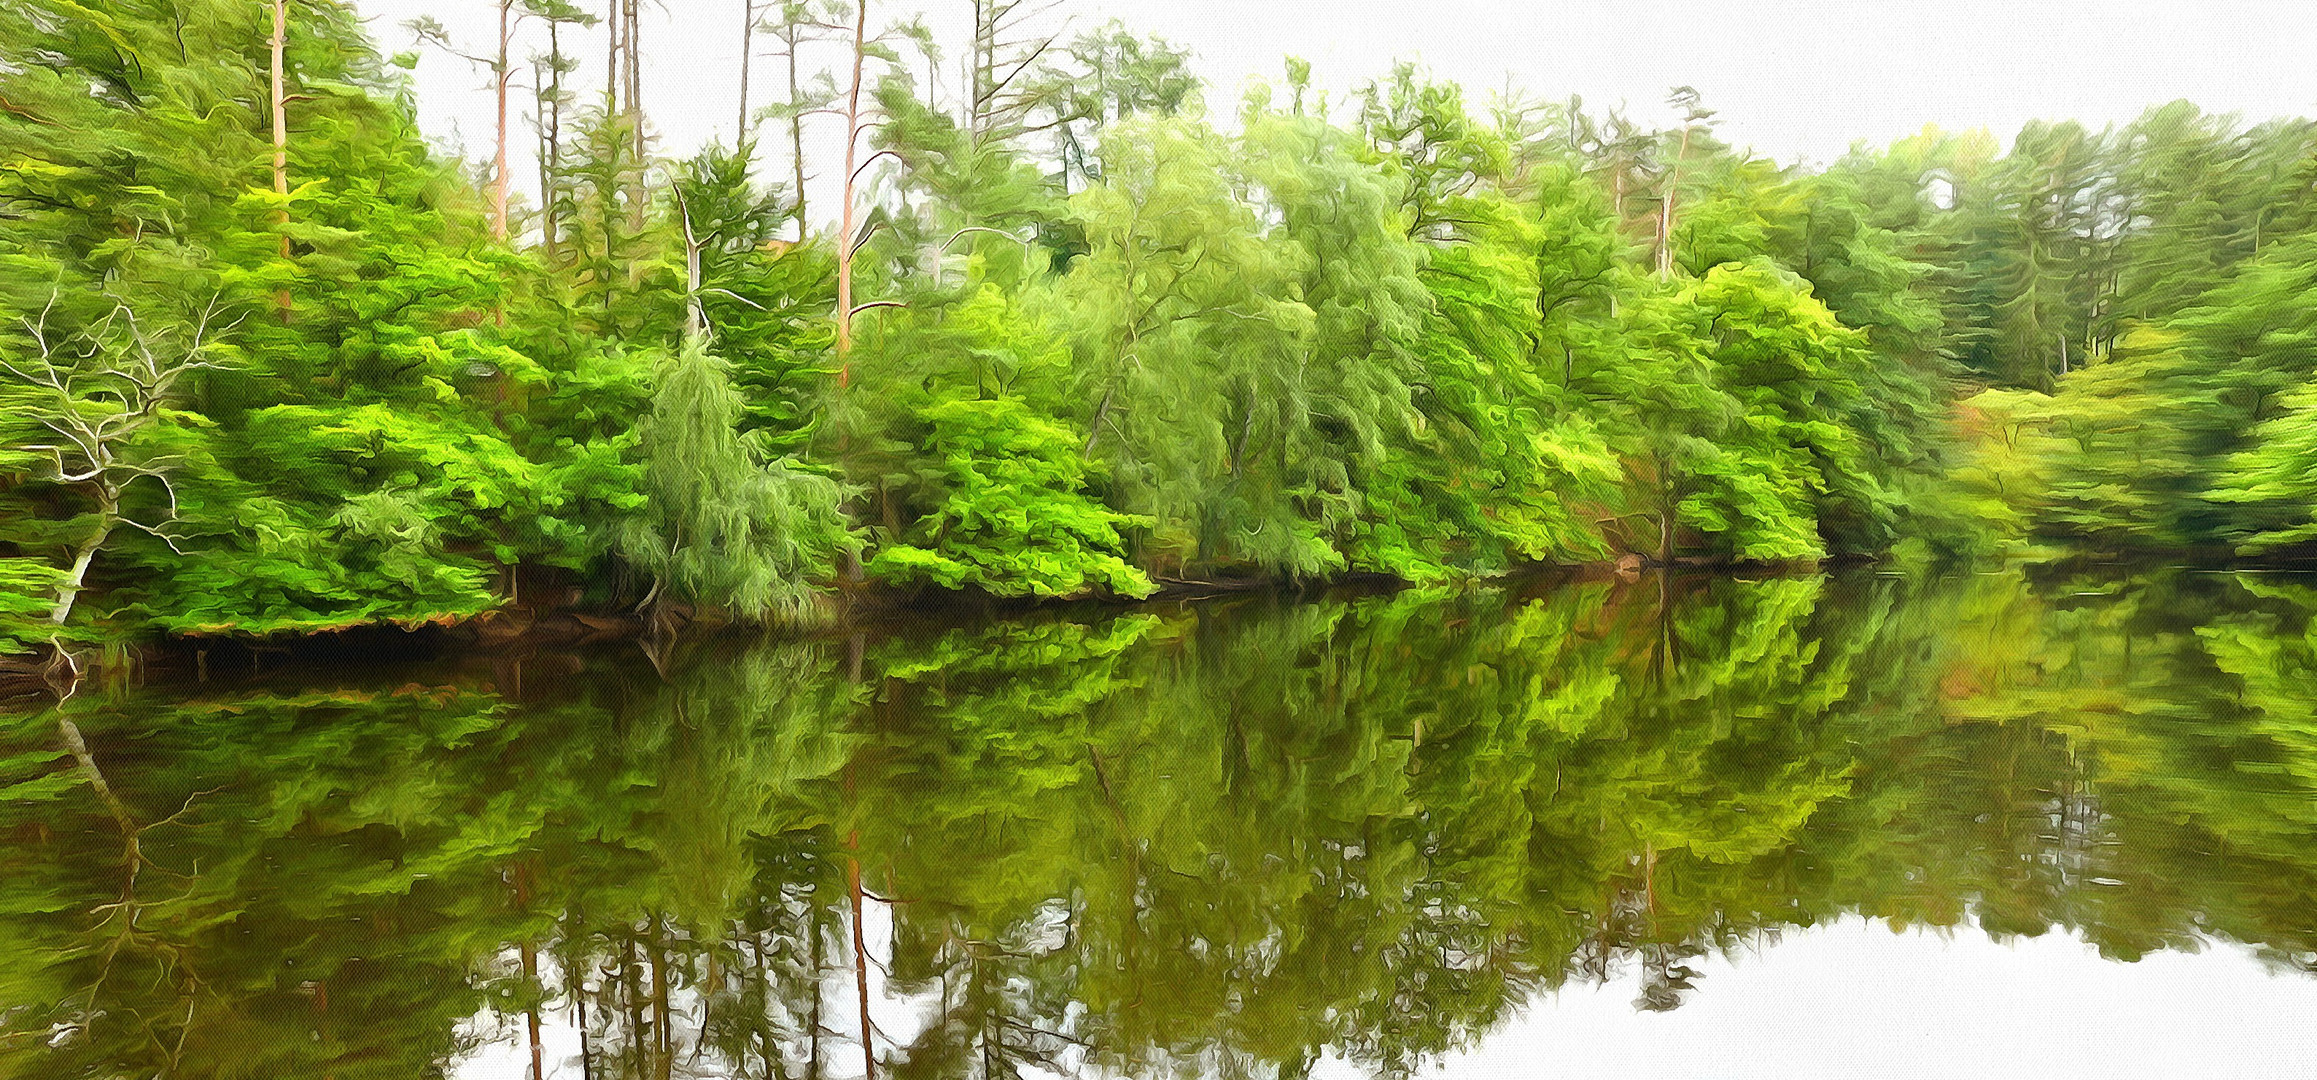 Green reflections